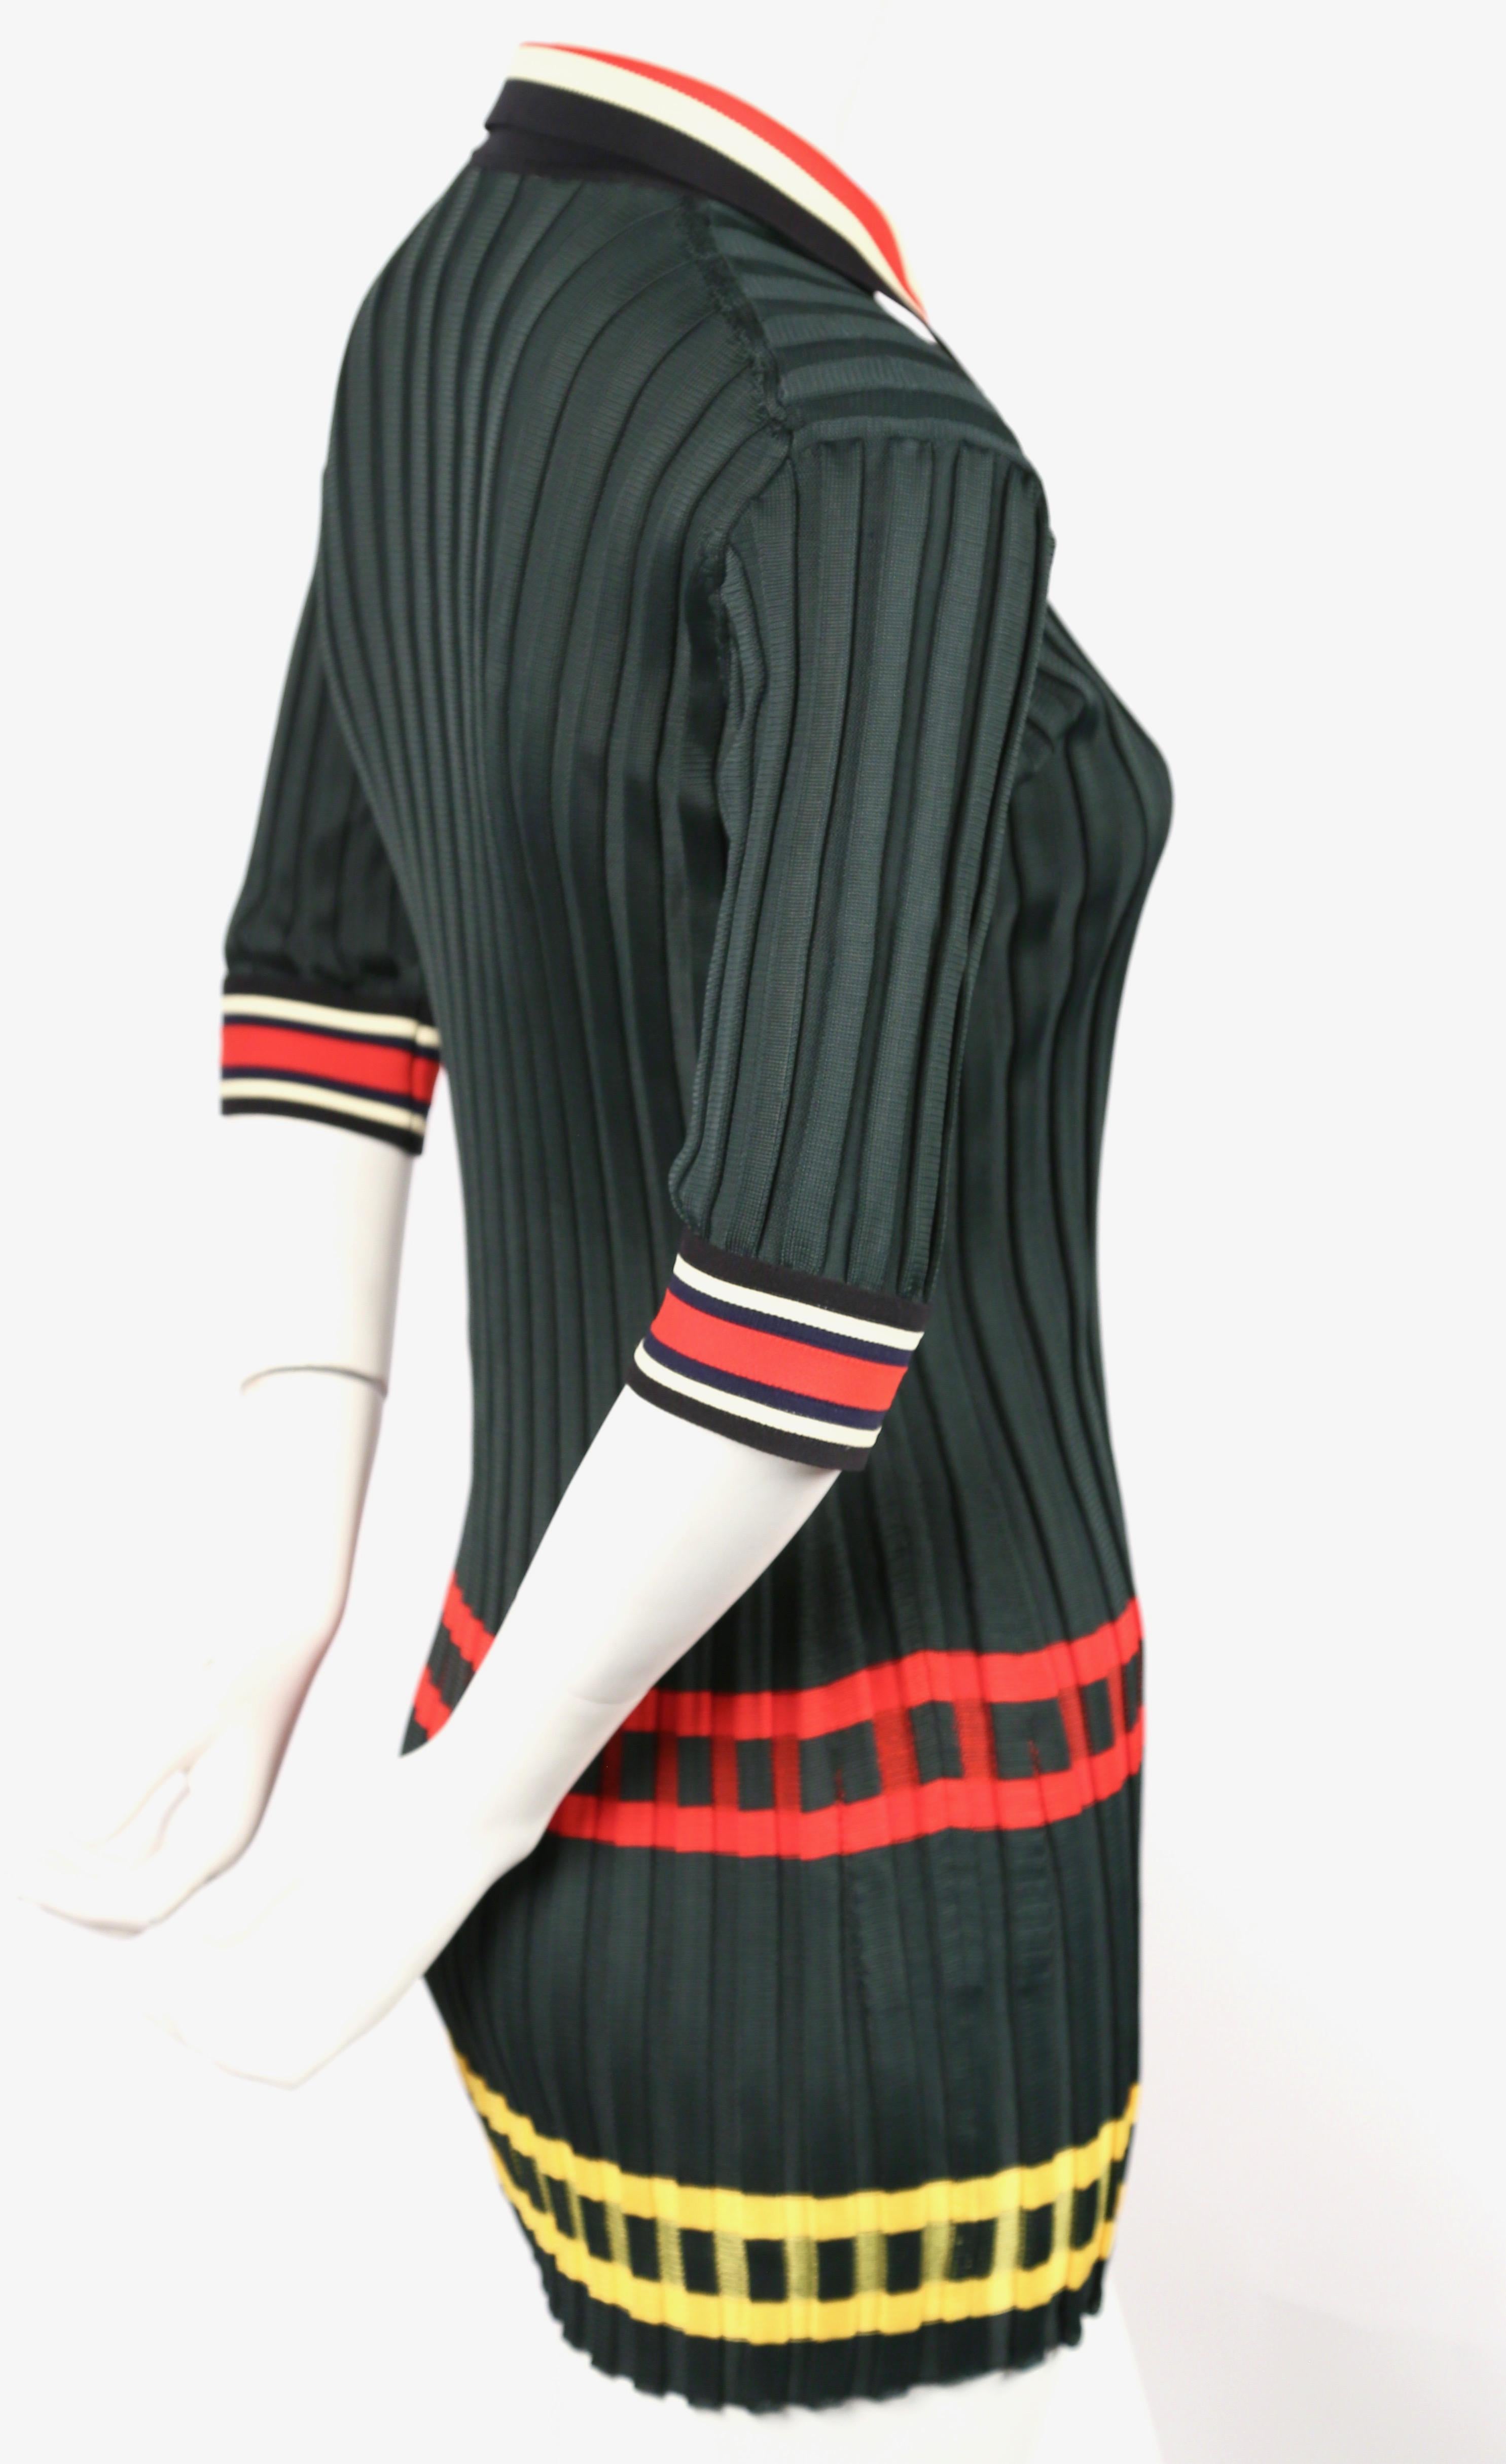 Black CELINE by PHOEBE PHILO green ribbed runway tunic top with stripes